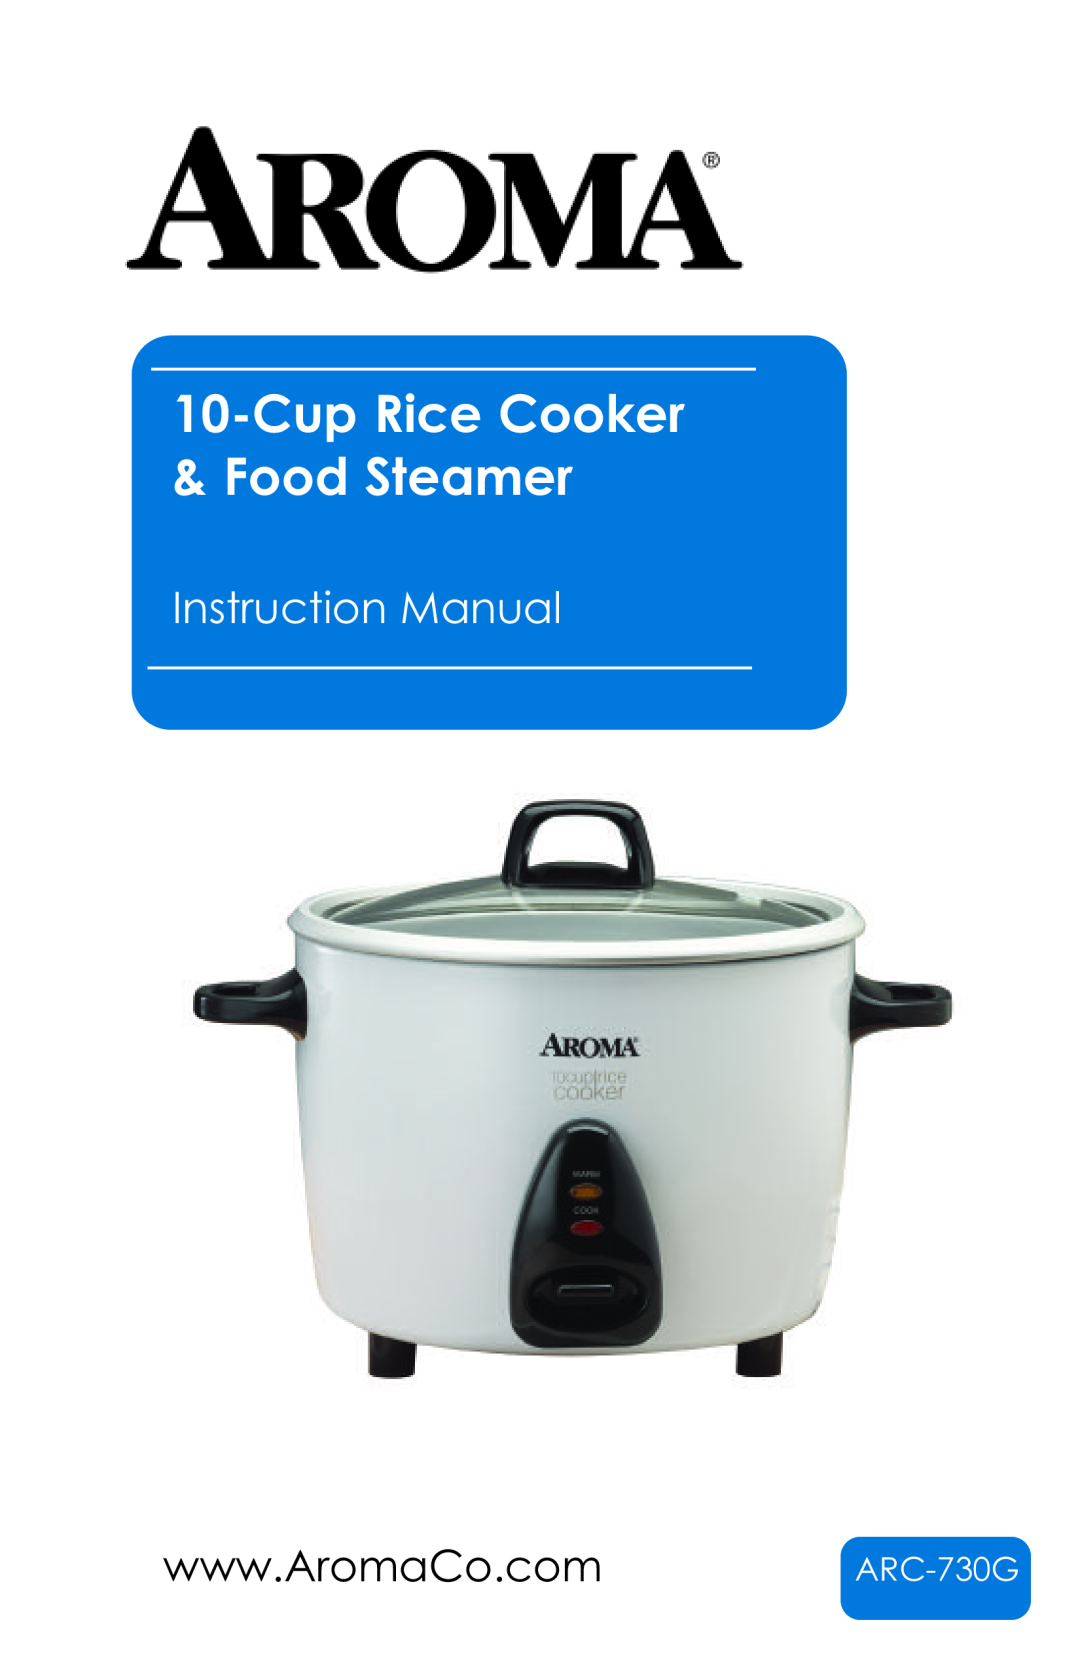 Aroma ARC-730G instruction manual Cup Rice Cooker & Food Steamer 